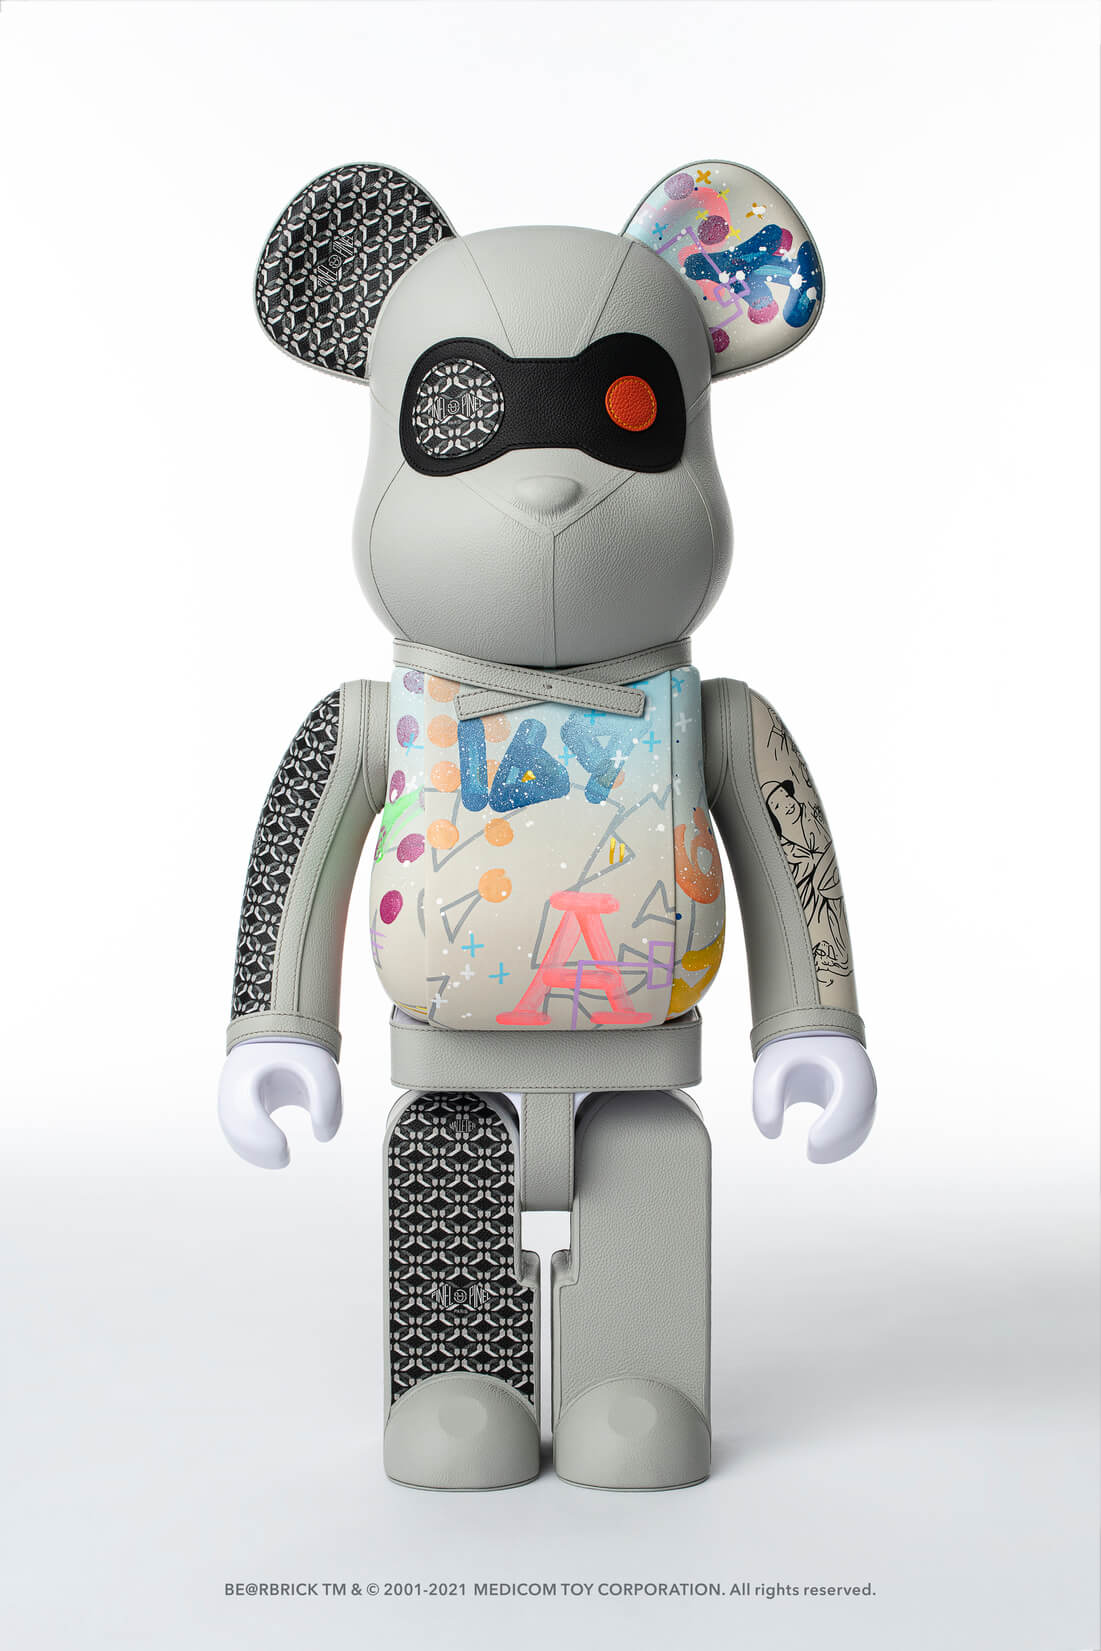 BE@RBRICK LIMITED COLLECTION / CYRIL KONGO x PINEL ET PINEL x MEDICOM TOY